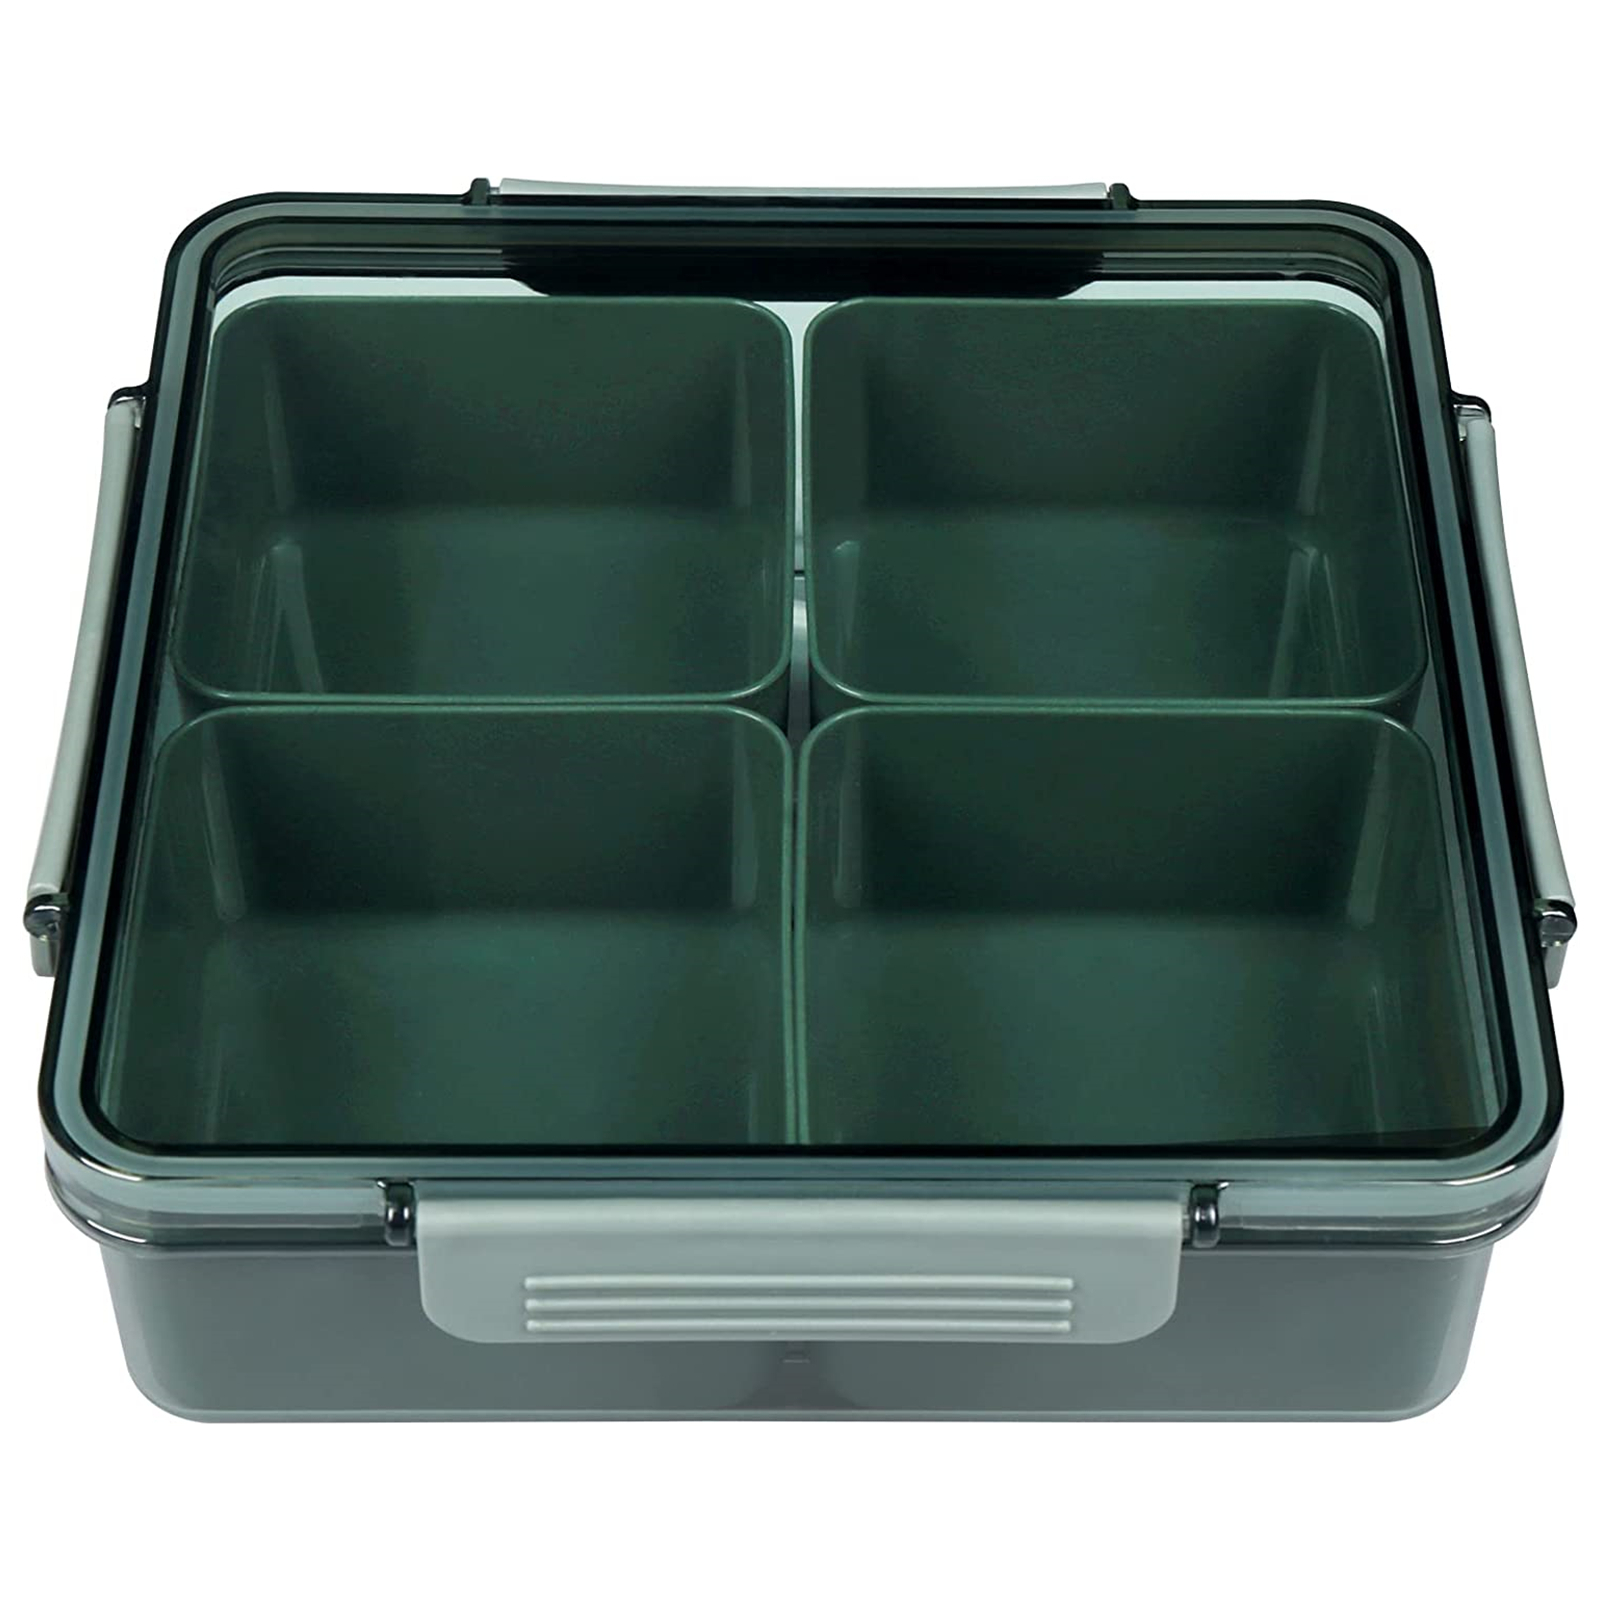 Shopwithgreen Divided Serving Tray with Lid & 4 Compartment Removable Dividers - Square Green-shopwithgreen